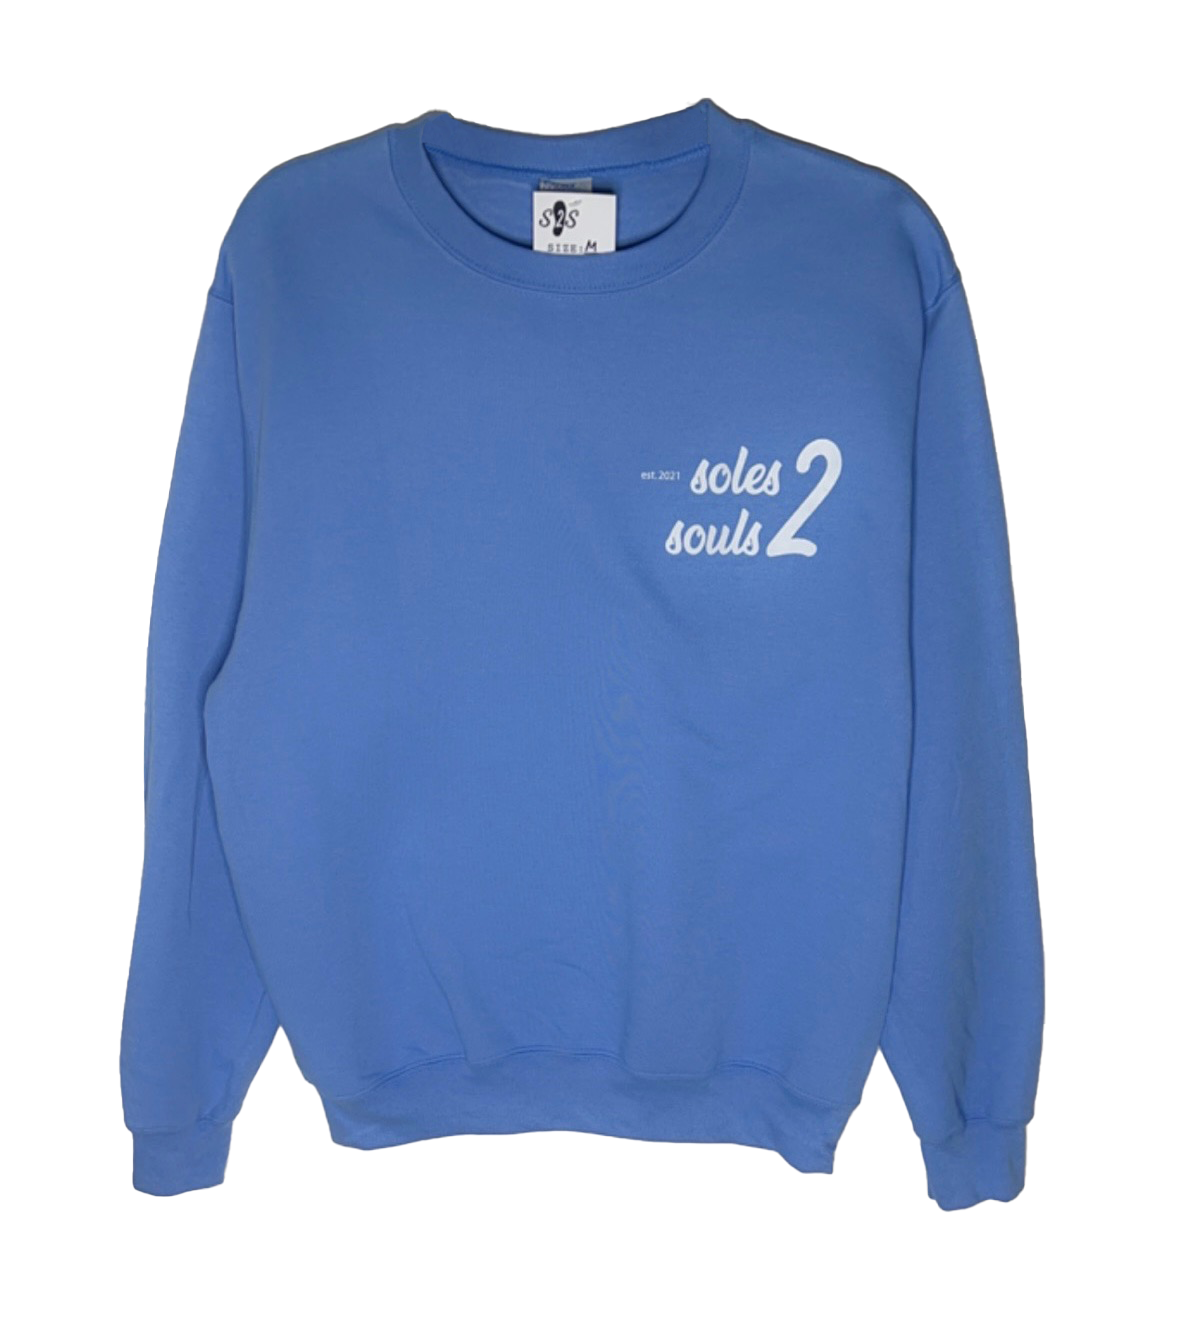 Service of Others Crewneck